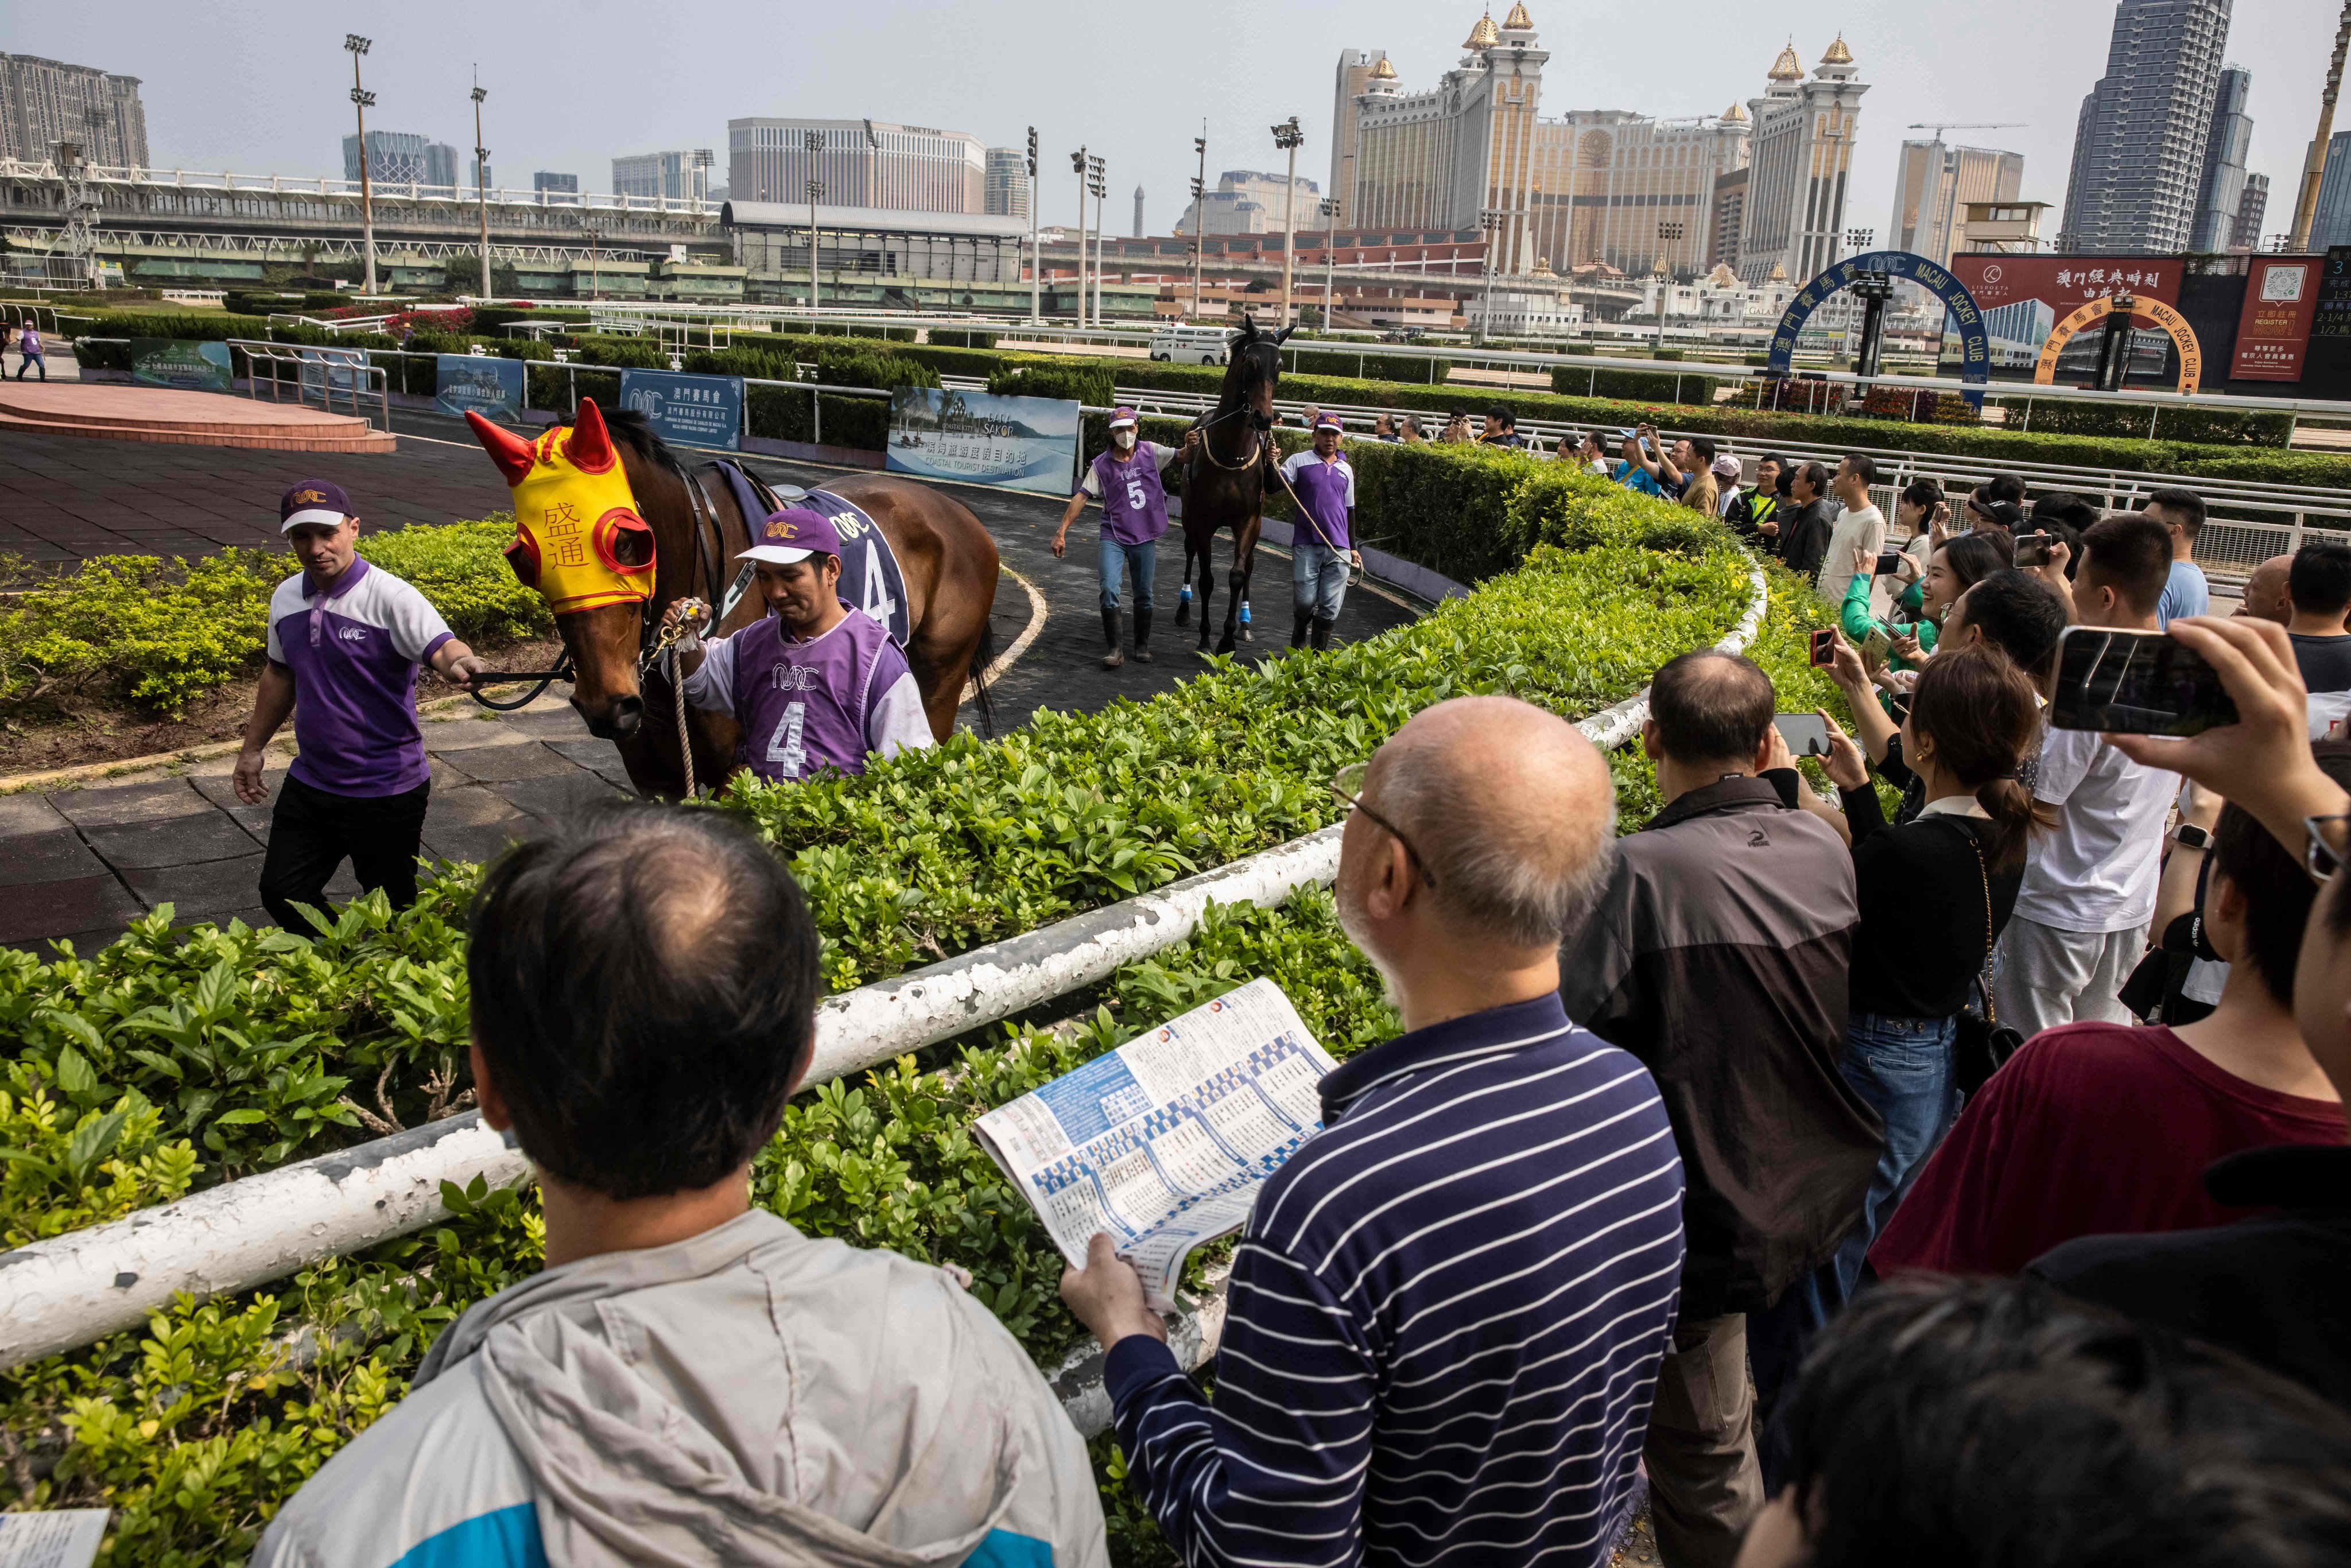 Horse racing in Macau has been consigned to history. Photo: AFP